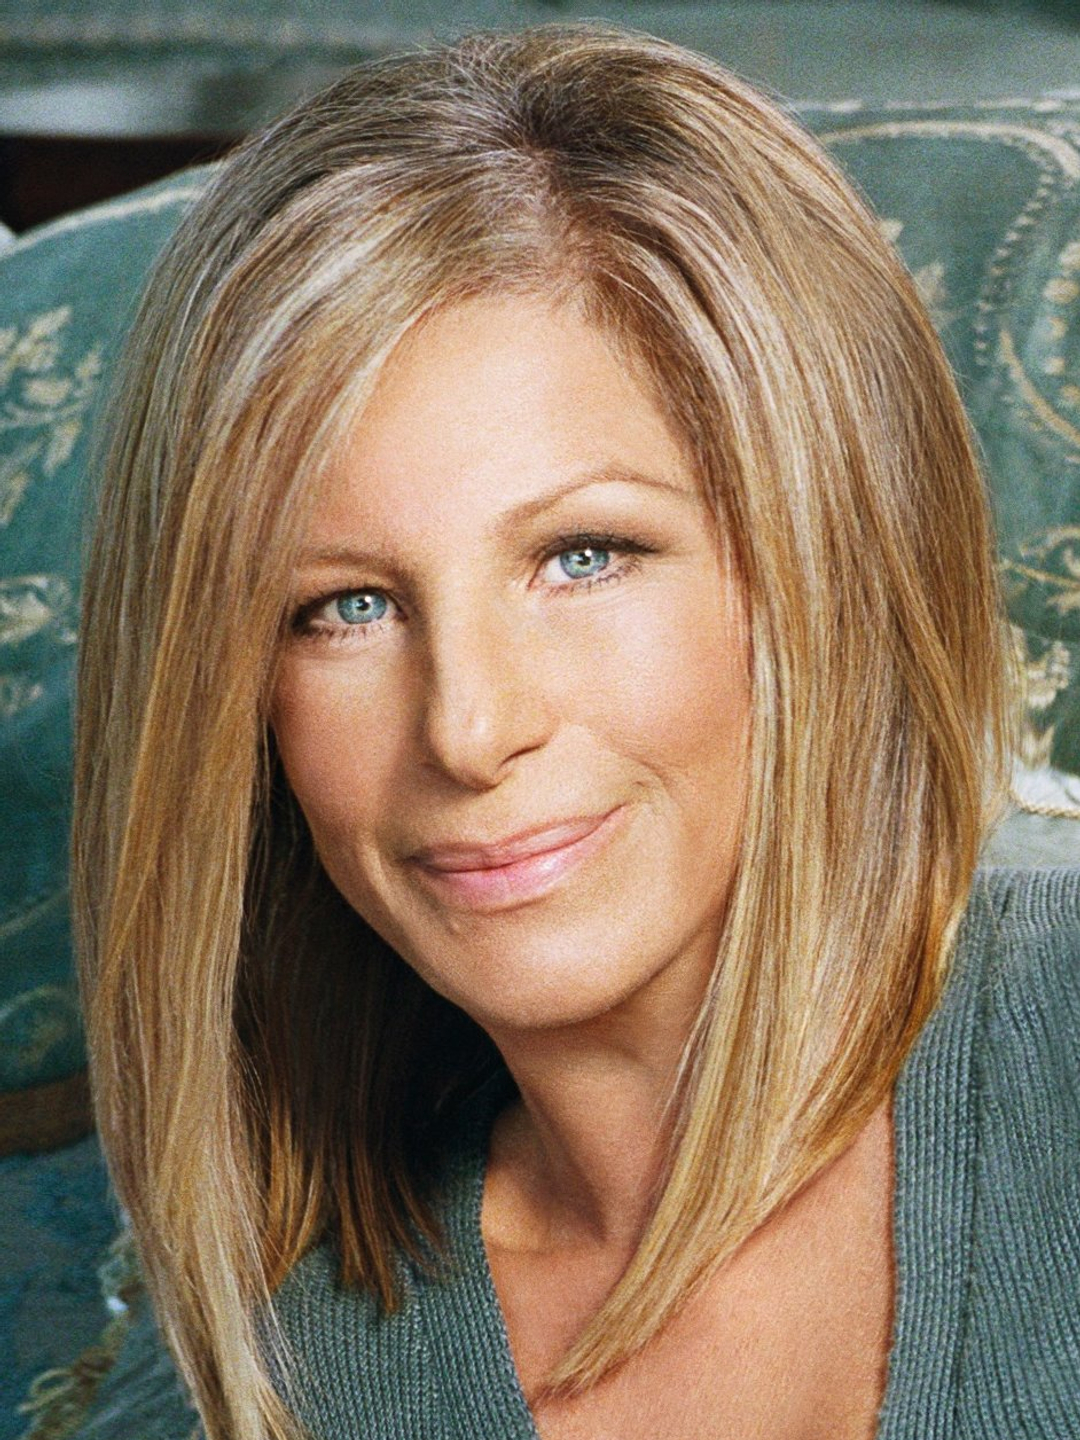 Barbra Streisand young age